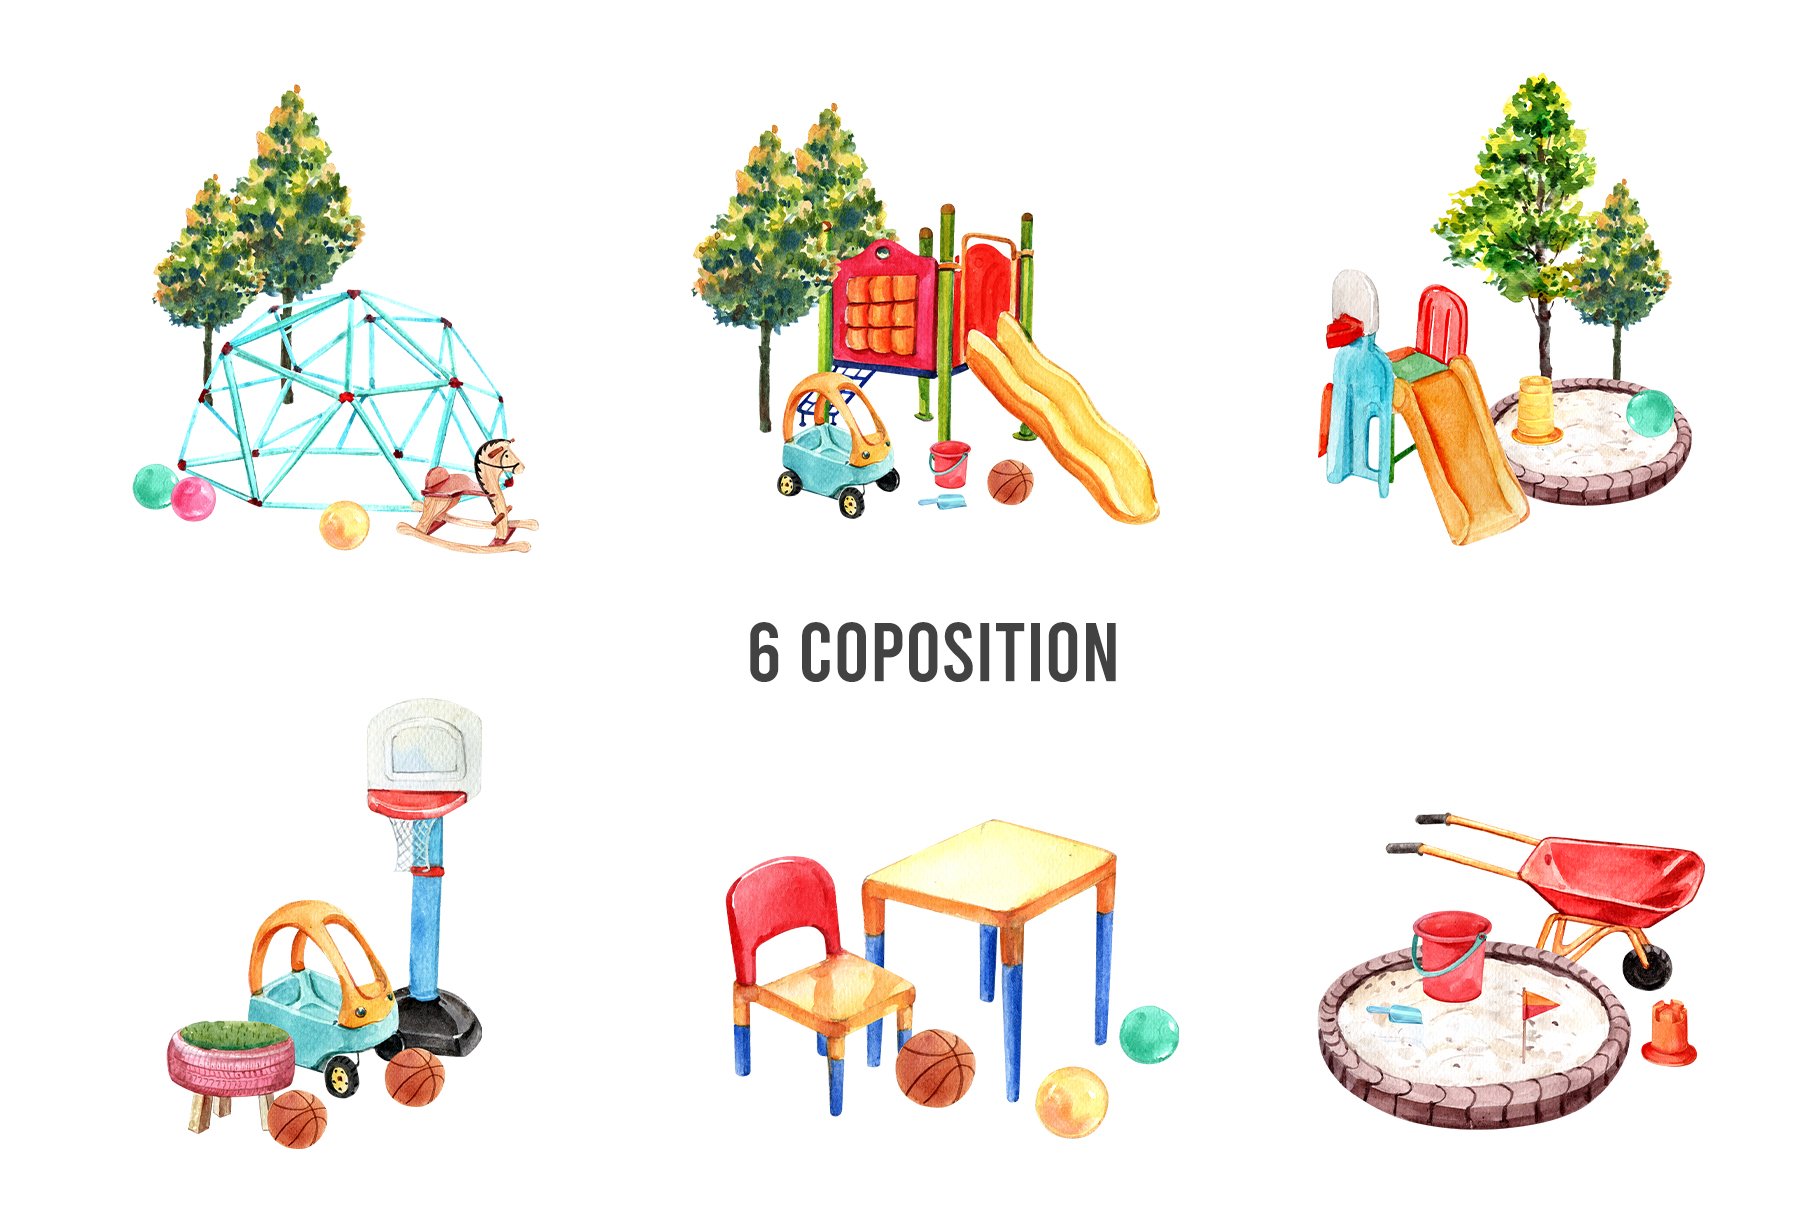 Some playground compositions for you.